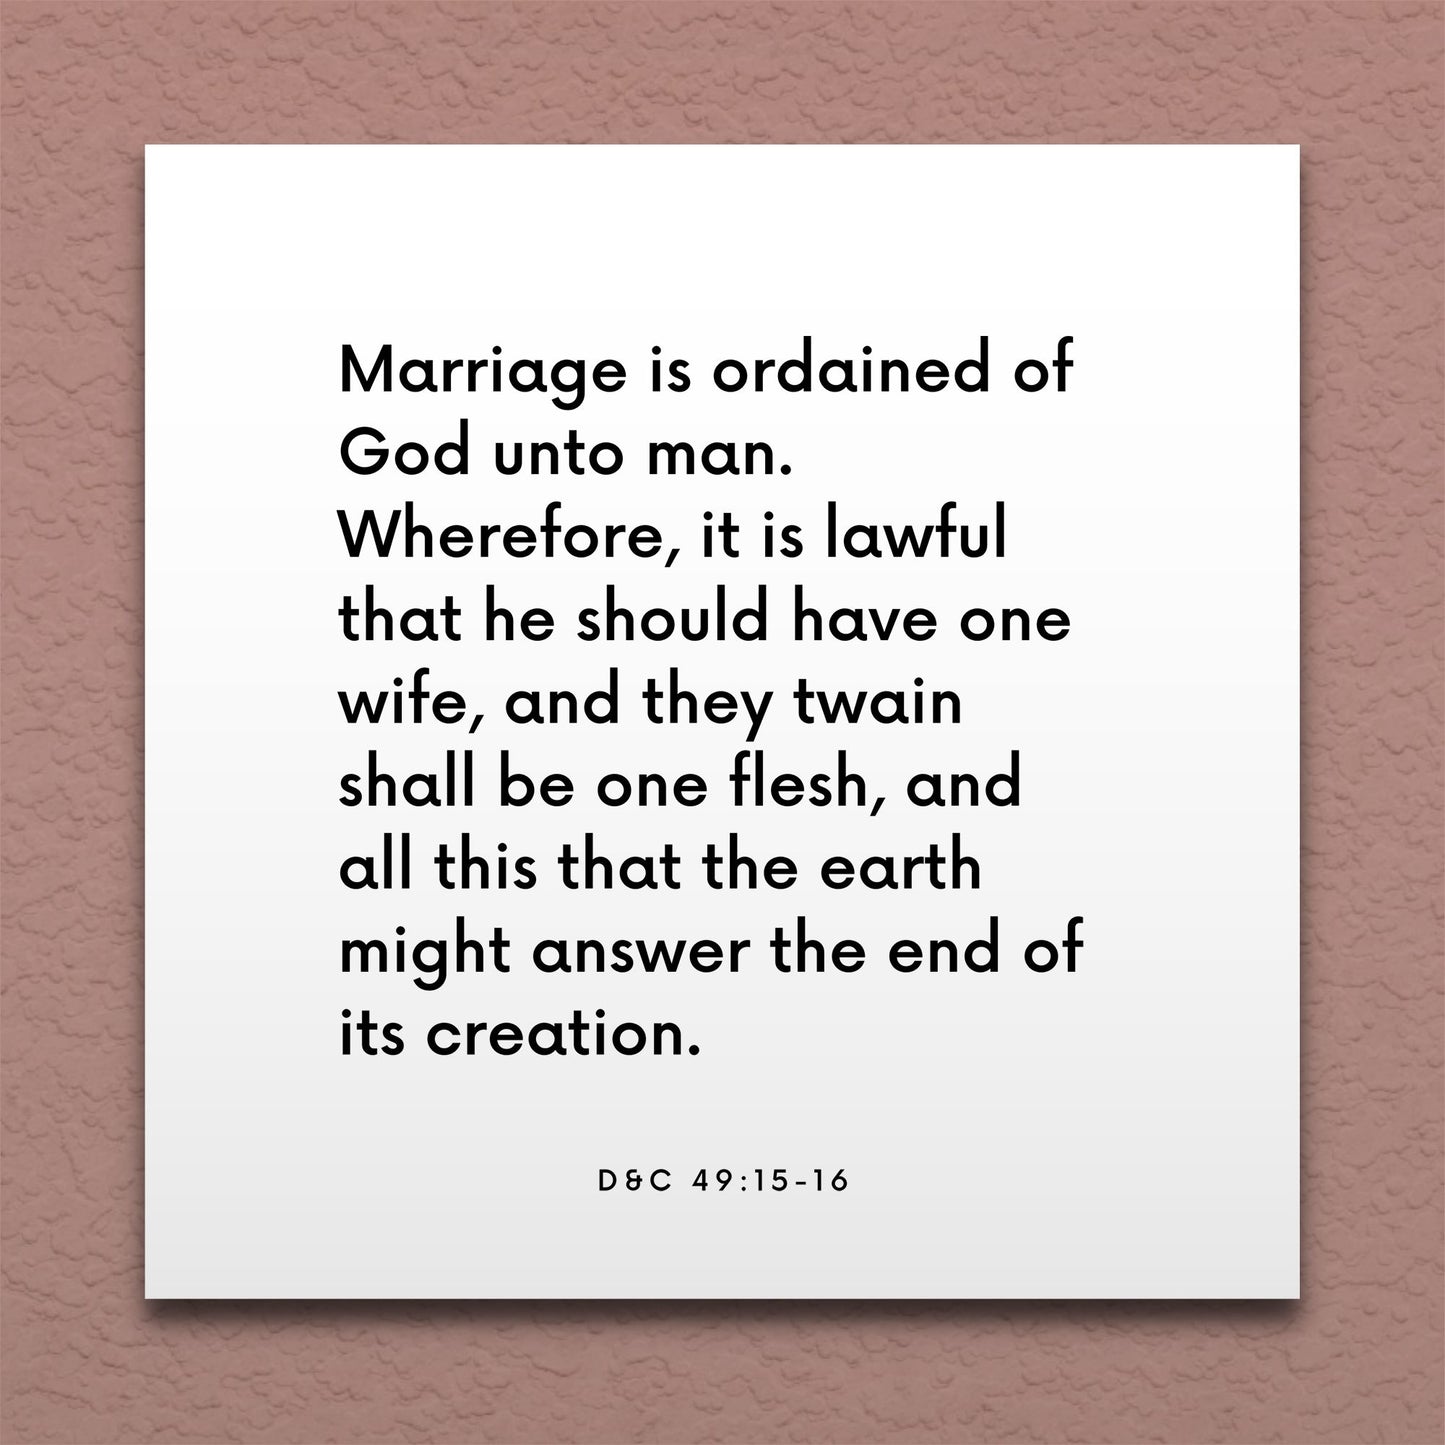 Wall-mounted scripture tile for D&C 49:15-16 - "Marriage is ordained of God unto man"